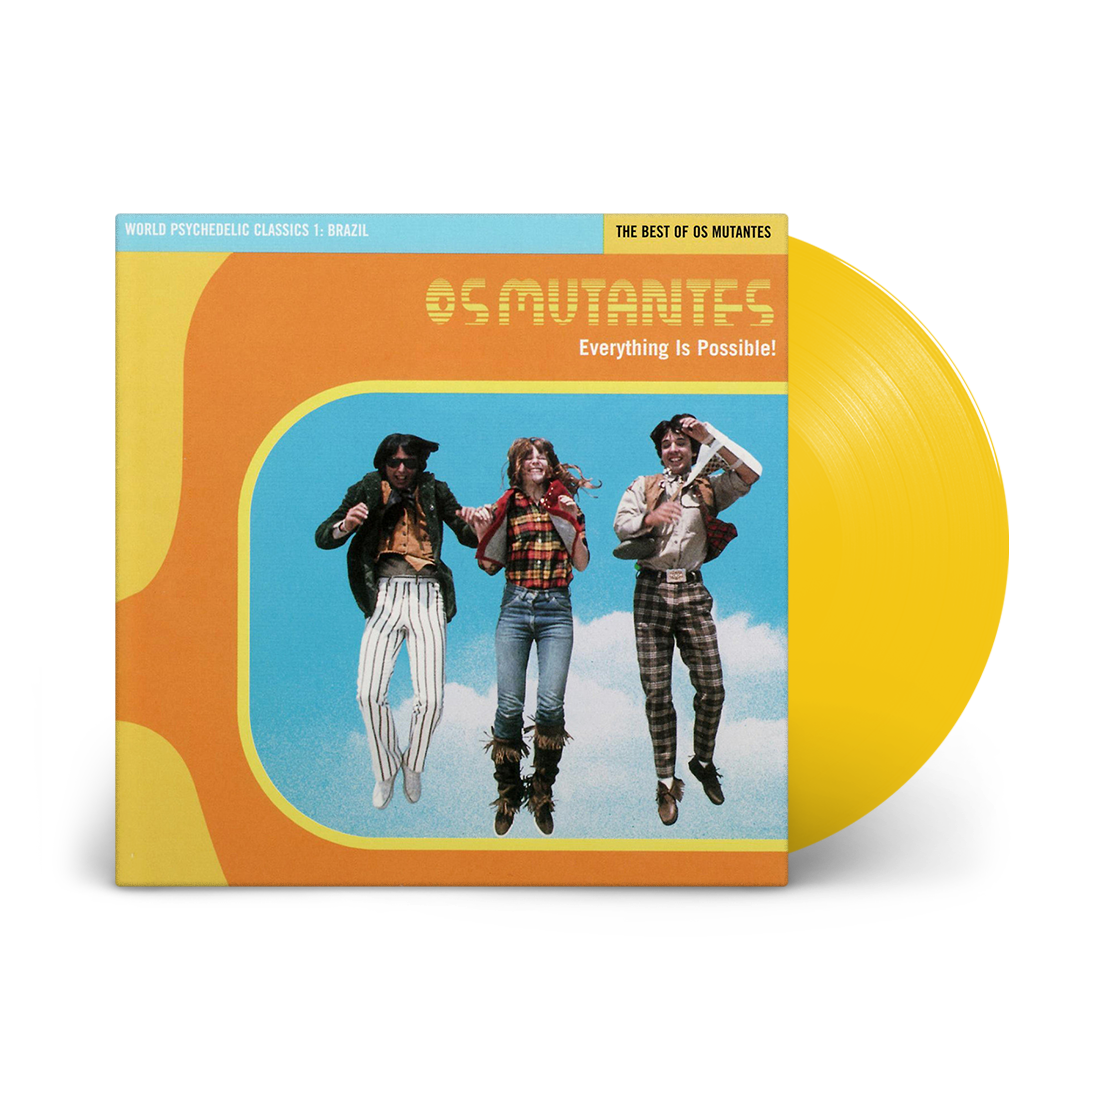 Various Artists - World Psychedelic Classics 1: Everything Is Possible: The Best Of Os Mutantes: Yellow Vinyl LP